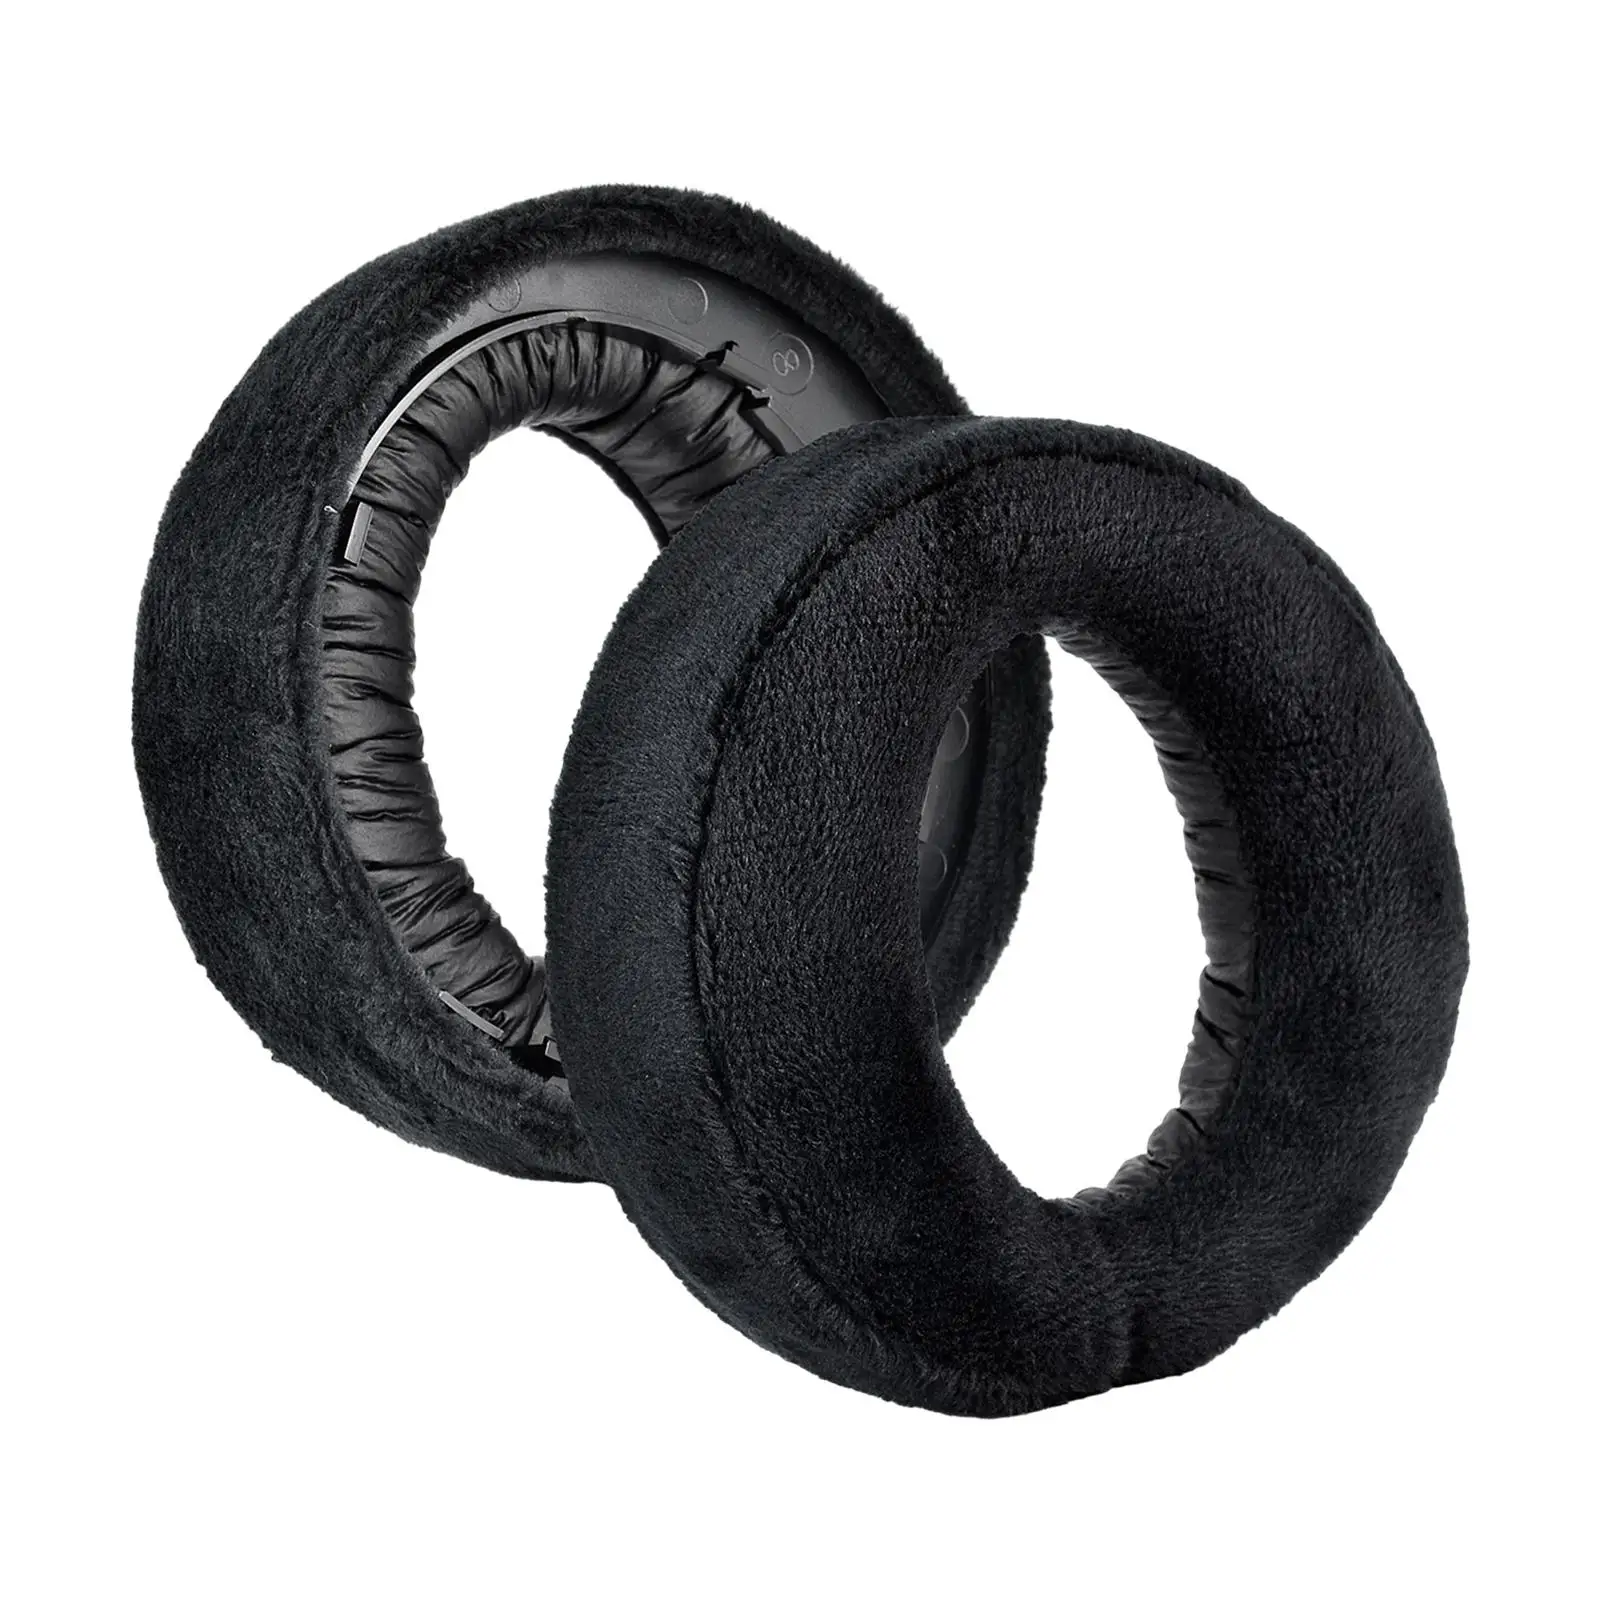 Earpads Cushion Covers Easy Installation Sturdy Multifunction Lightweight Comfort Memory Foam for Headphones Supplies